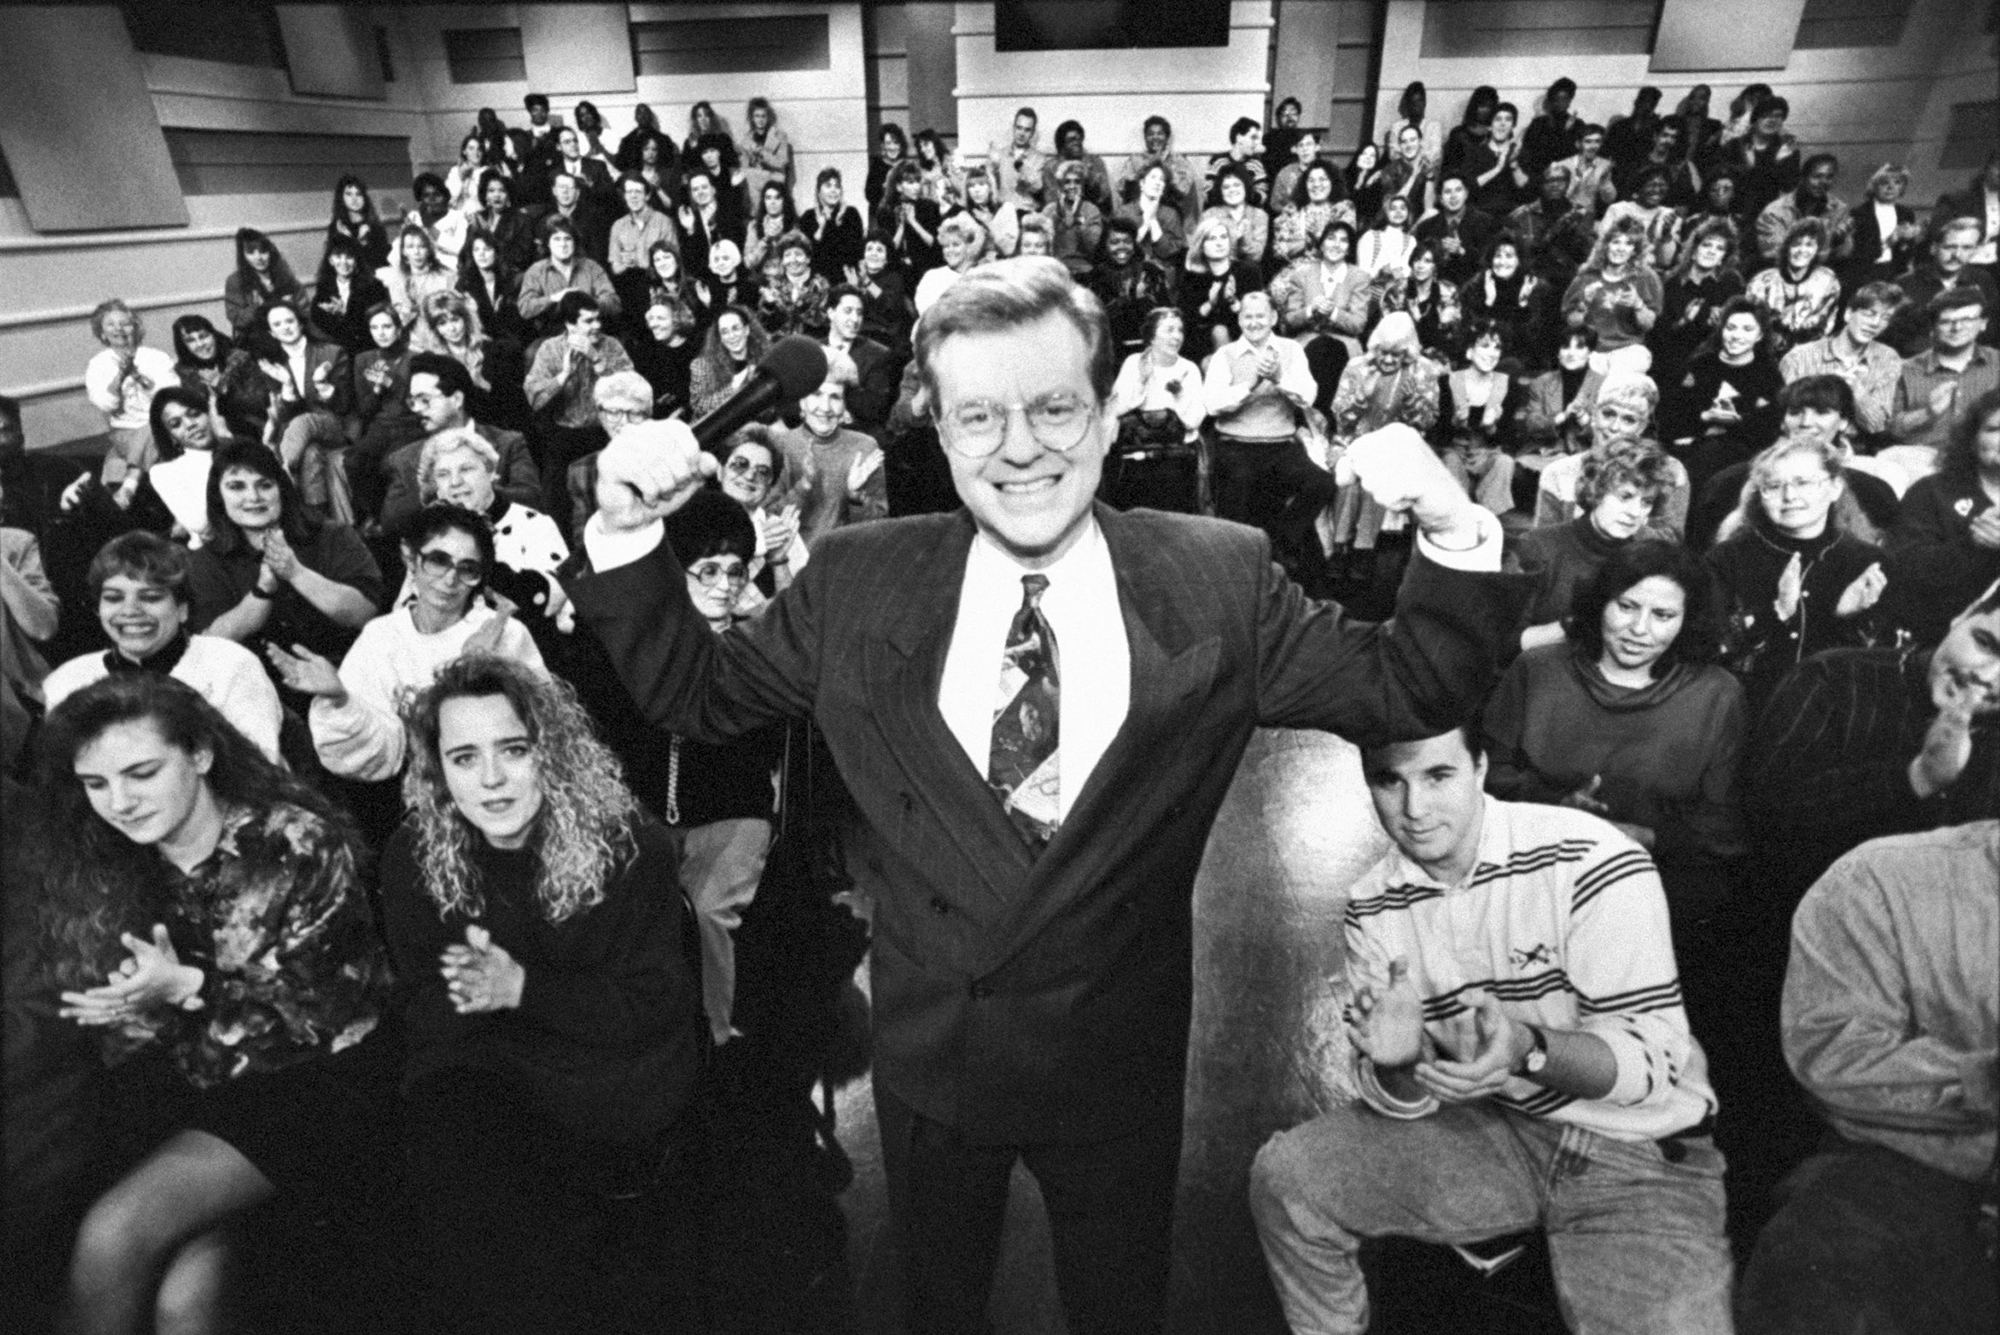 Jerry Springer poses with a studio audience during taping for “The Jerry Springer Show” in 1992. 